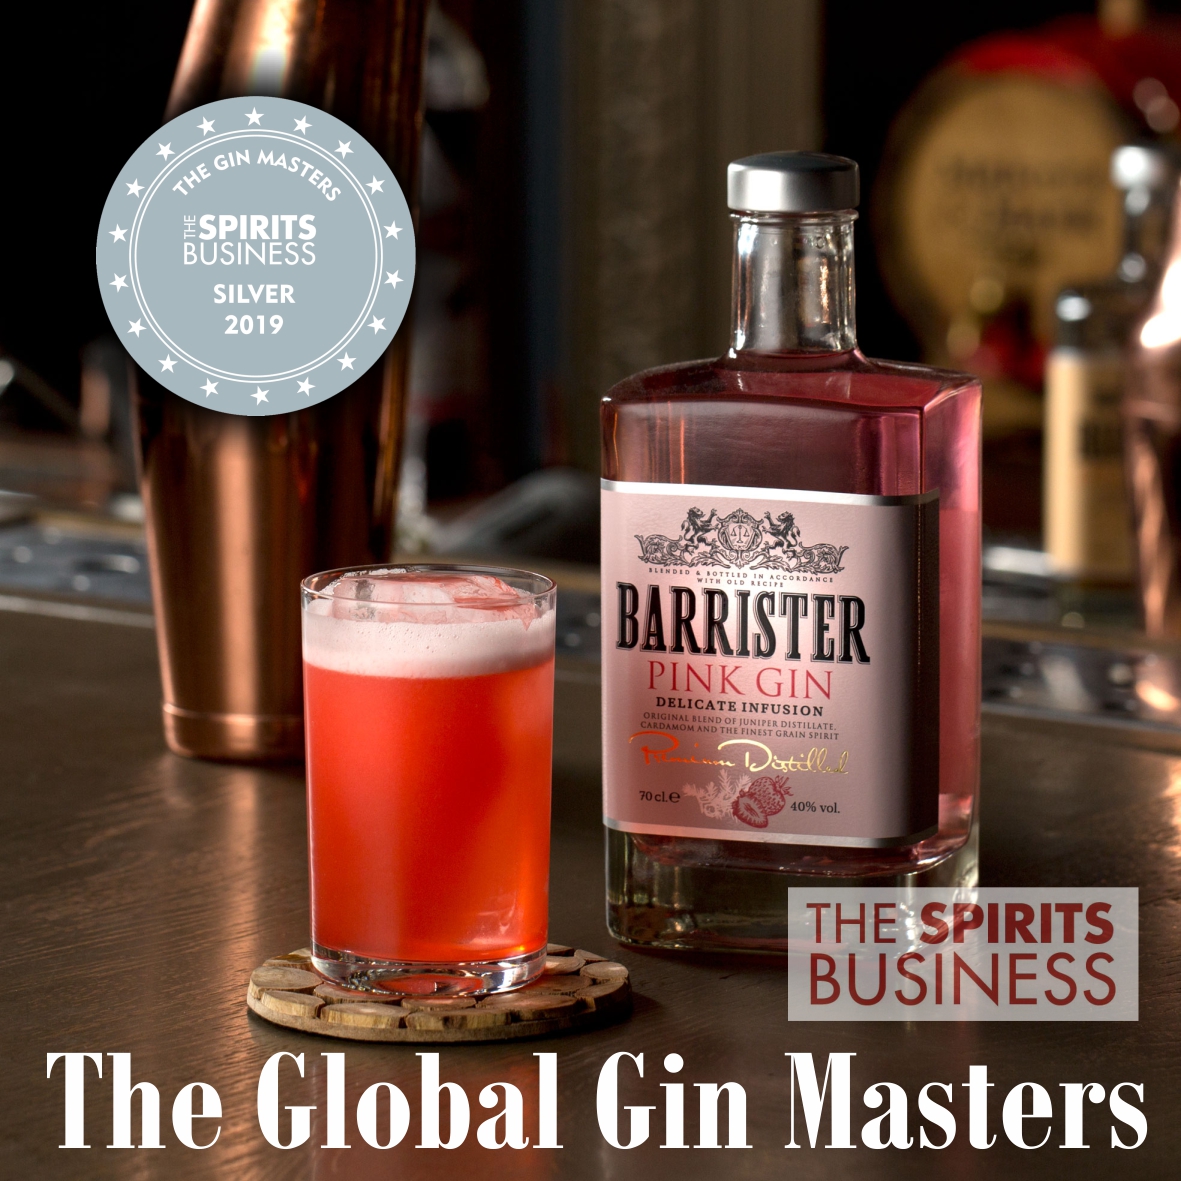 BARRISTER Pink – silver medalist of the Gin Masters